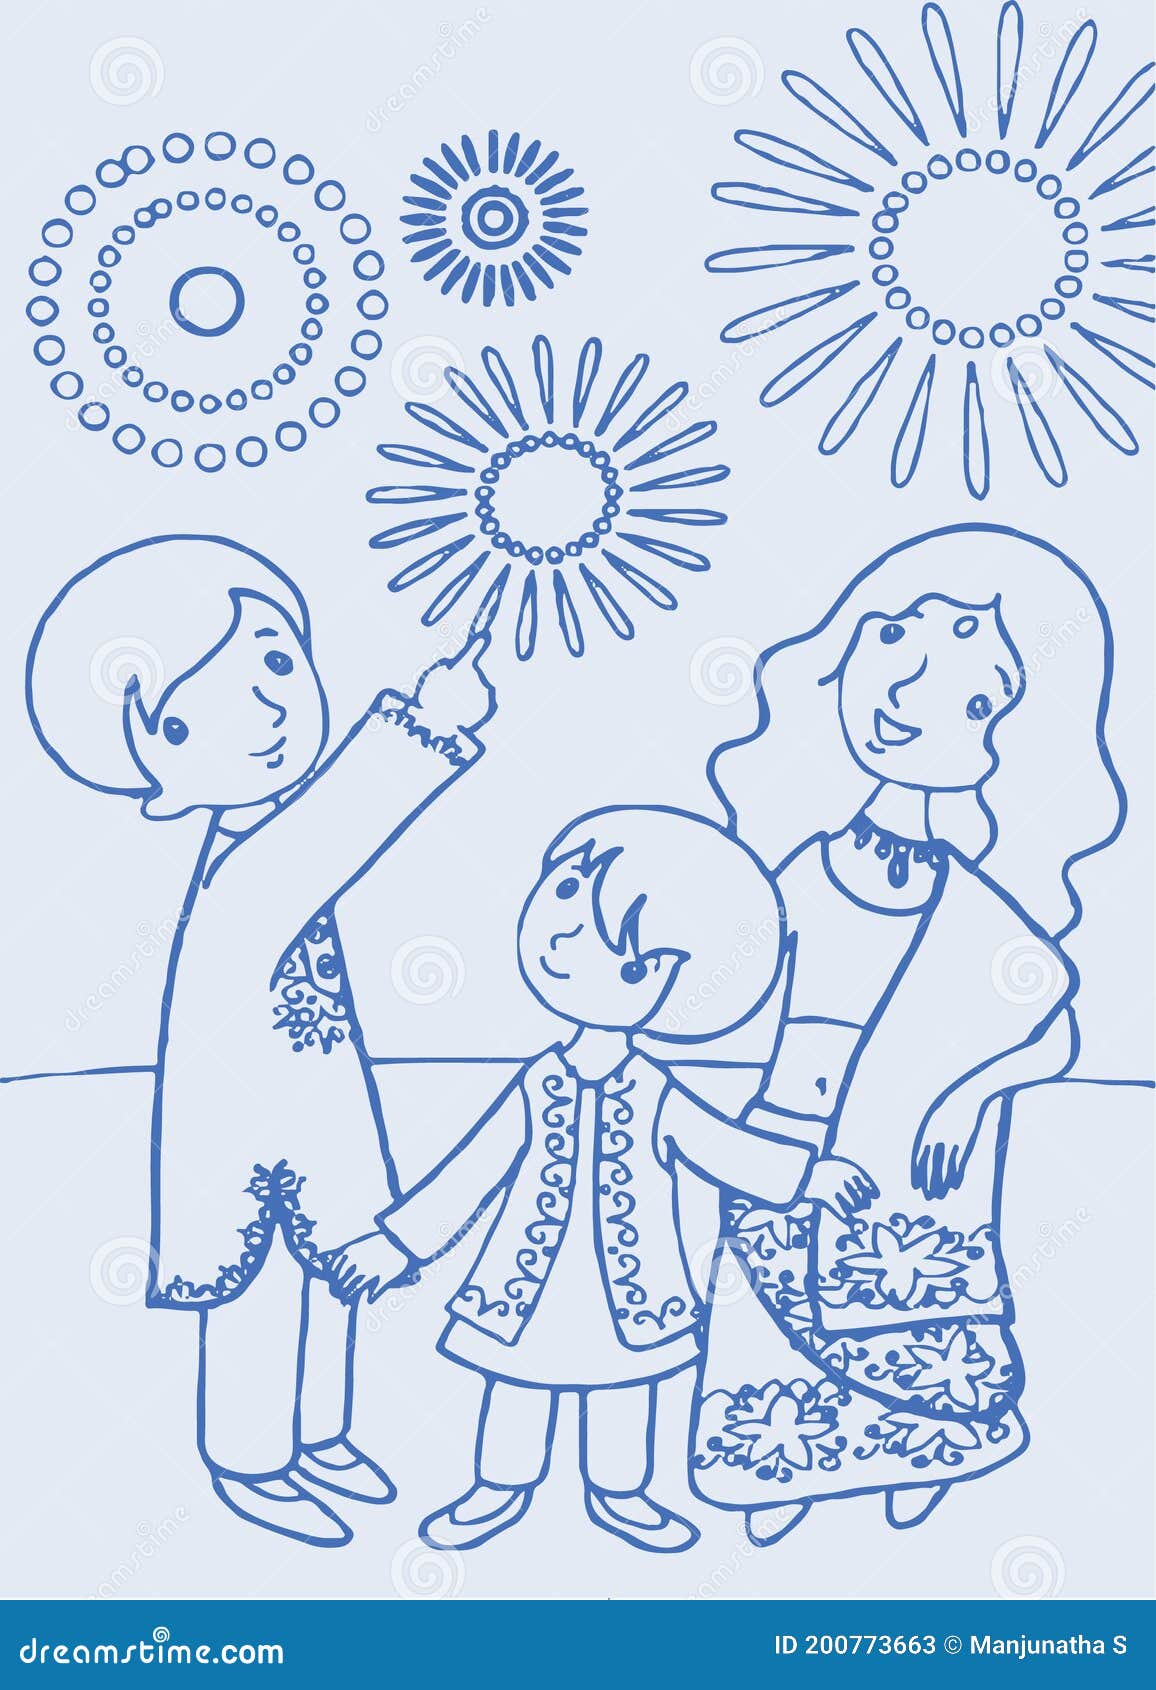 Diwali Coloring Activity Pages for Kids Diwali Decor for - Etsy Norway-saigonsouth.com.vn